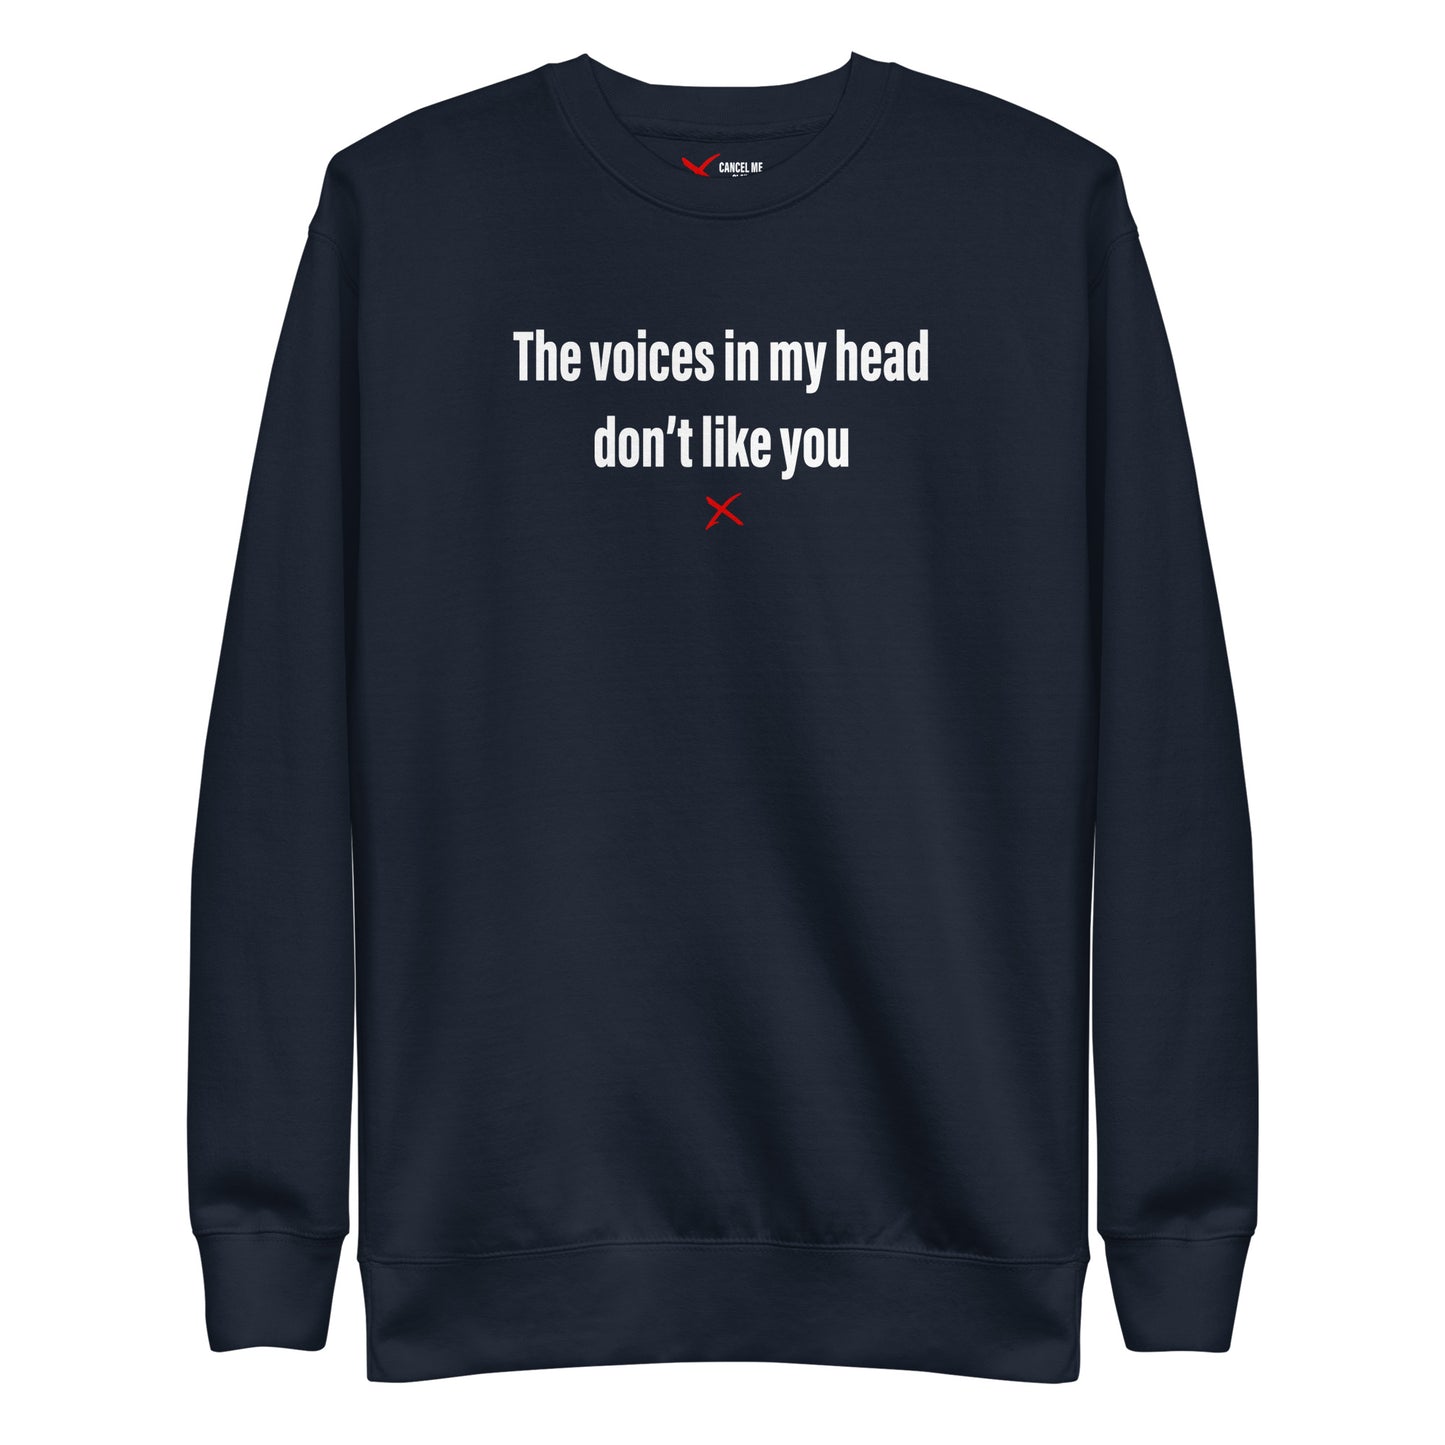 The voices in my head don't like you - Sweatshirt